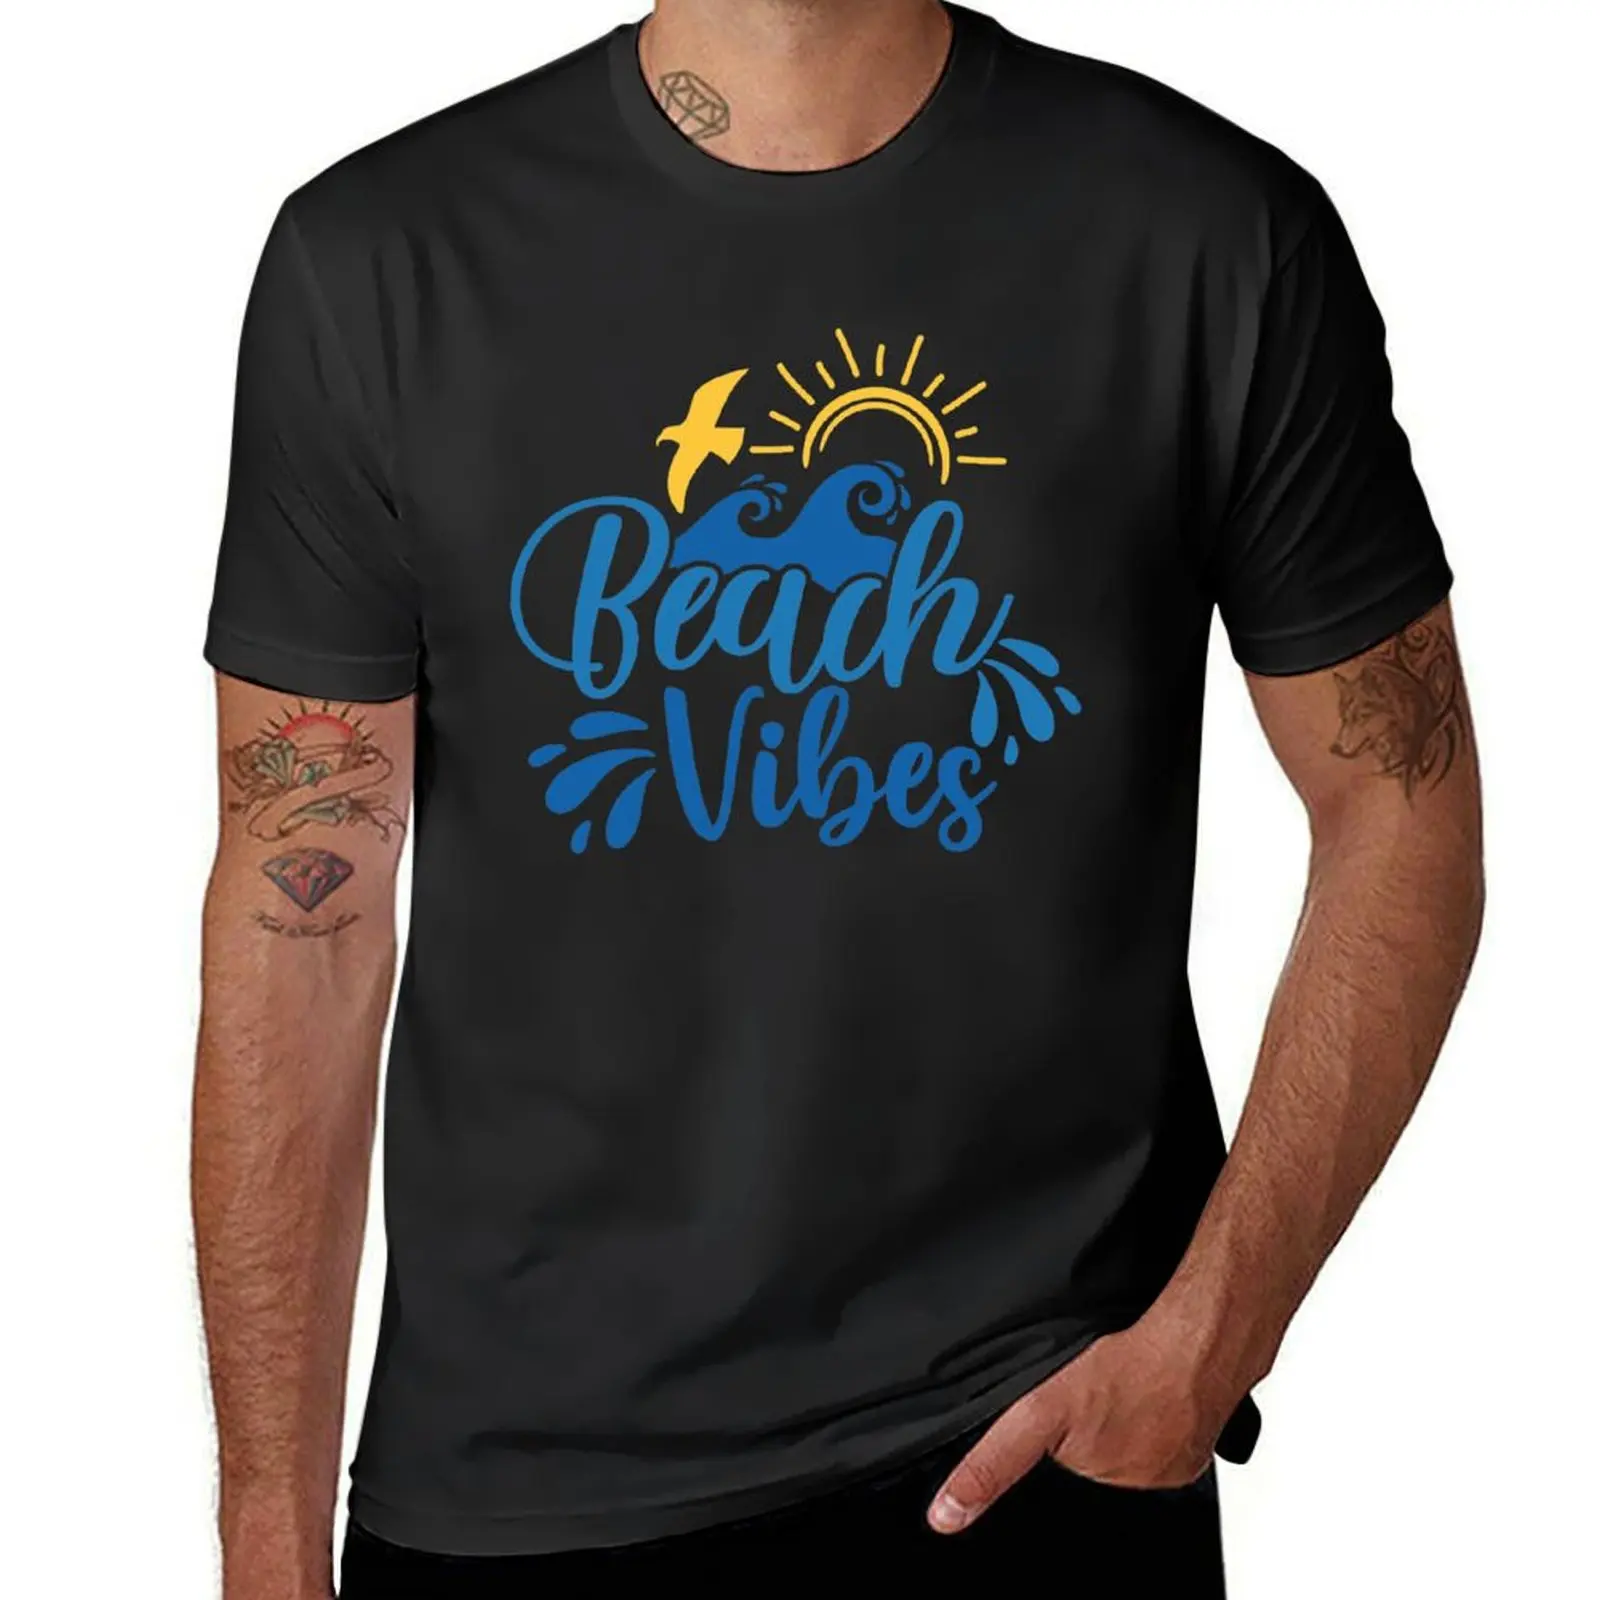 

Beach vibes - summer vacation loading T-shirt aesthetic clothes vintage cute clothes fitted t shirts for men